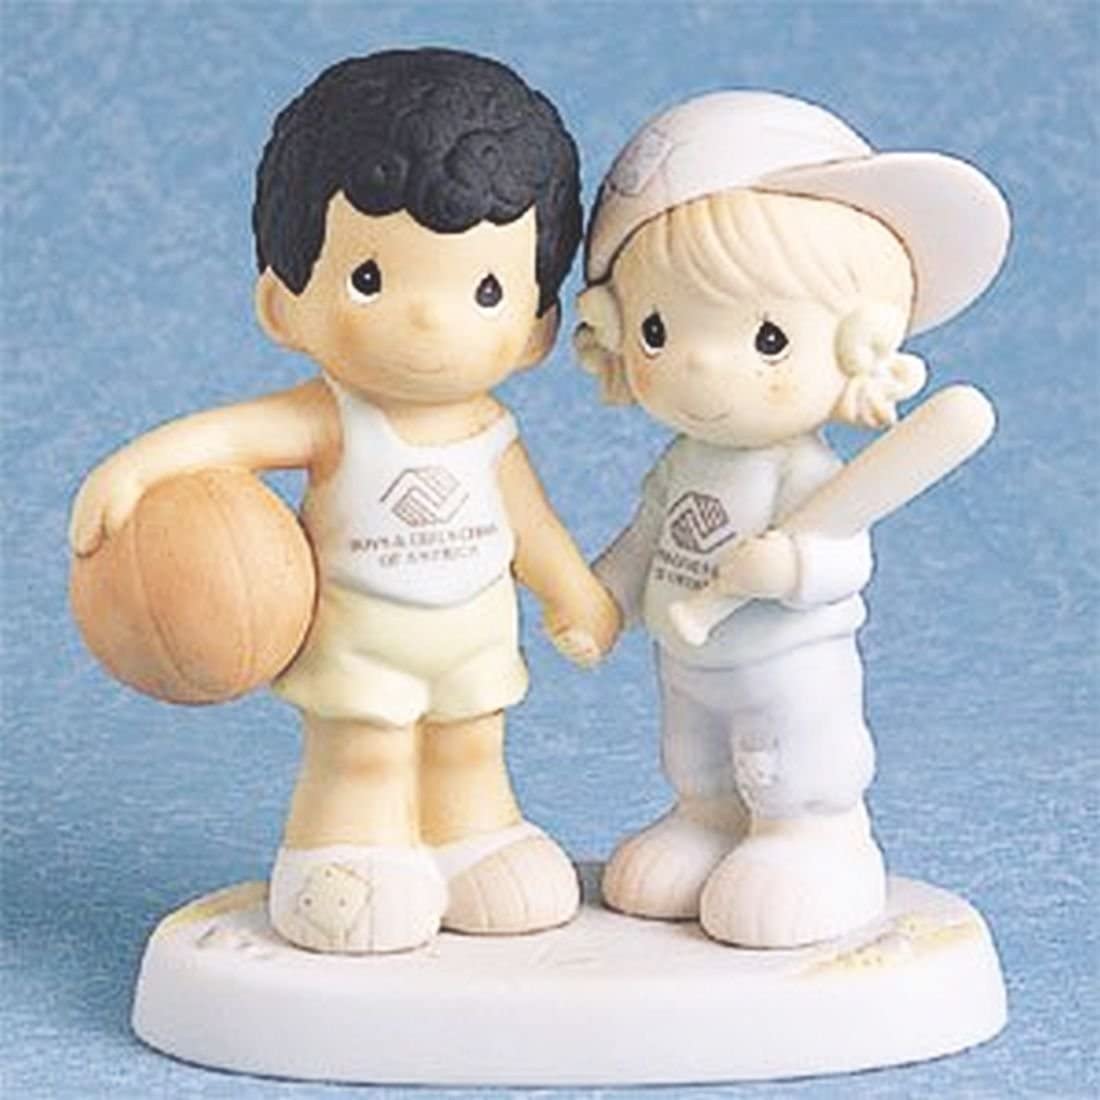 Precious Moments "Shoot Fot the Stars You'll Never Strike Out" figurines